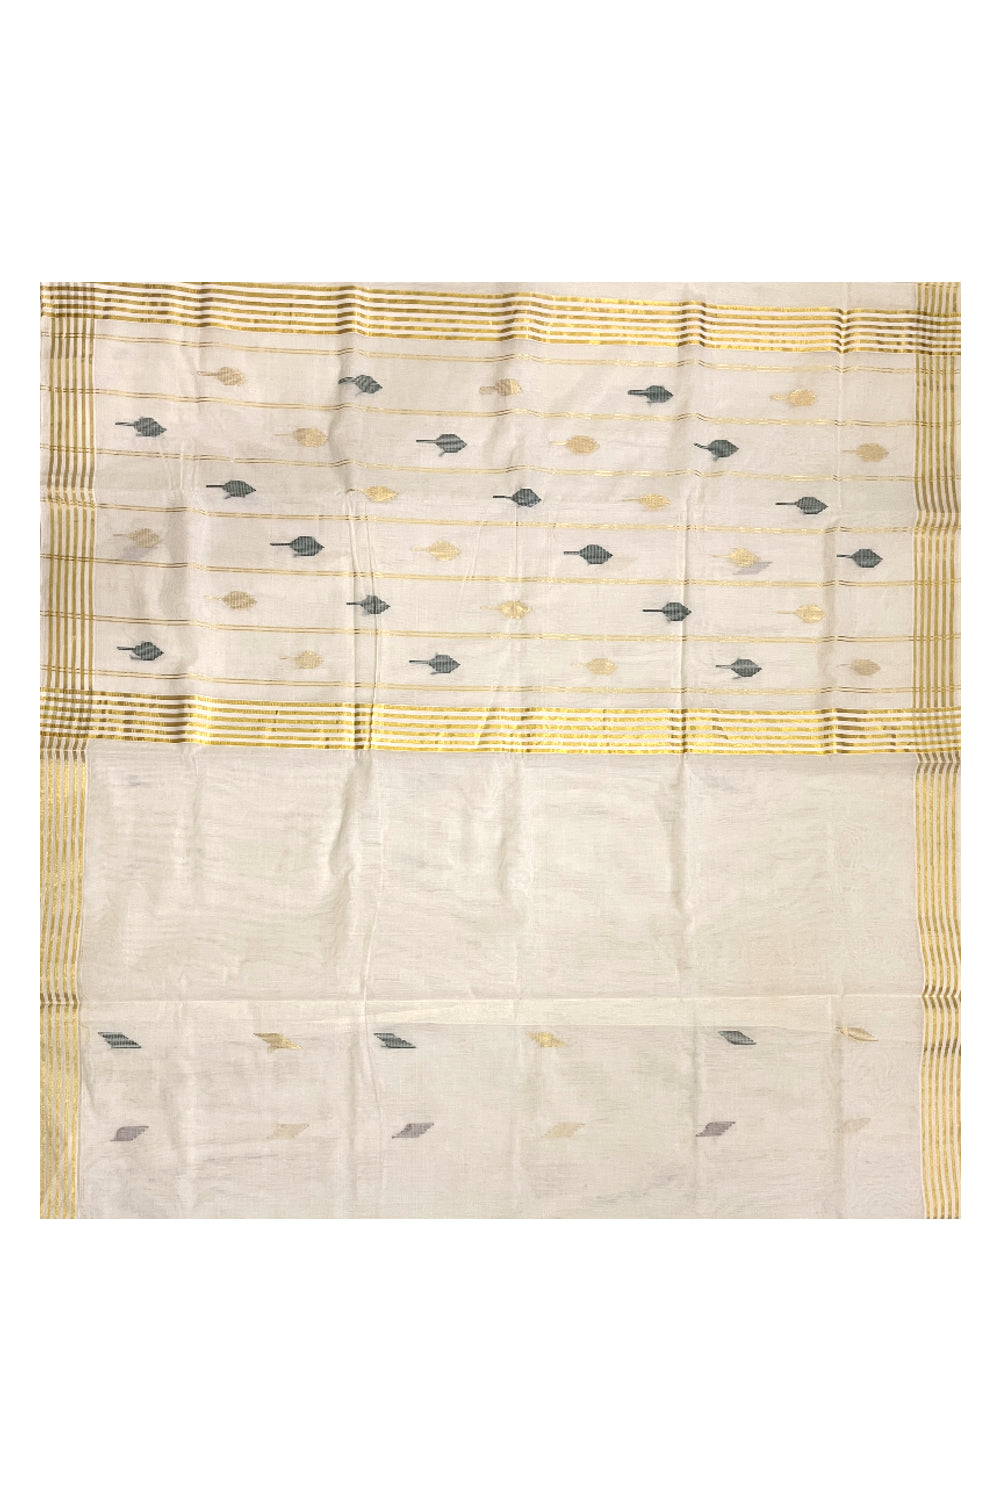 Southloom Premium Handloom Cotton Kerala Saree with Golden and Green Butta Works